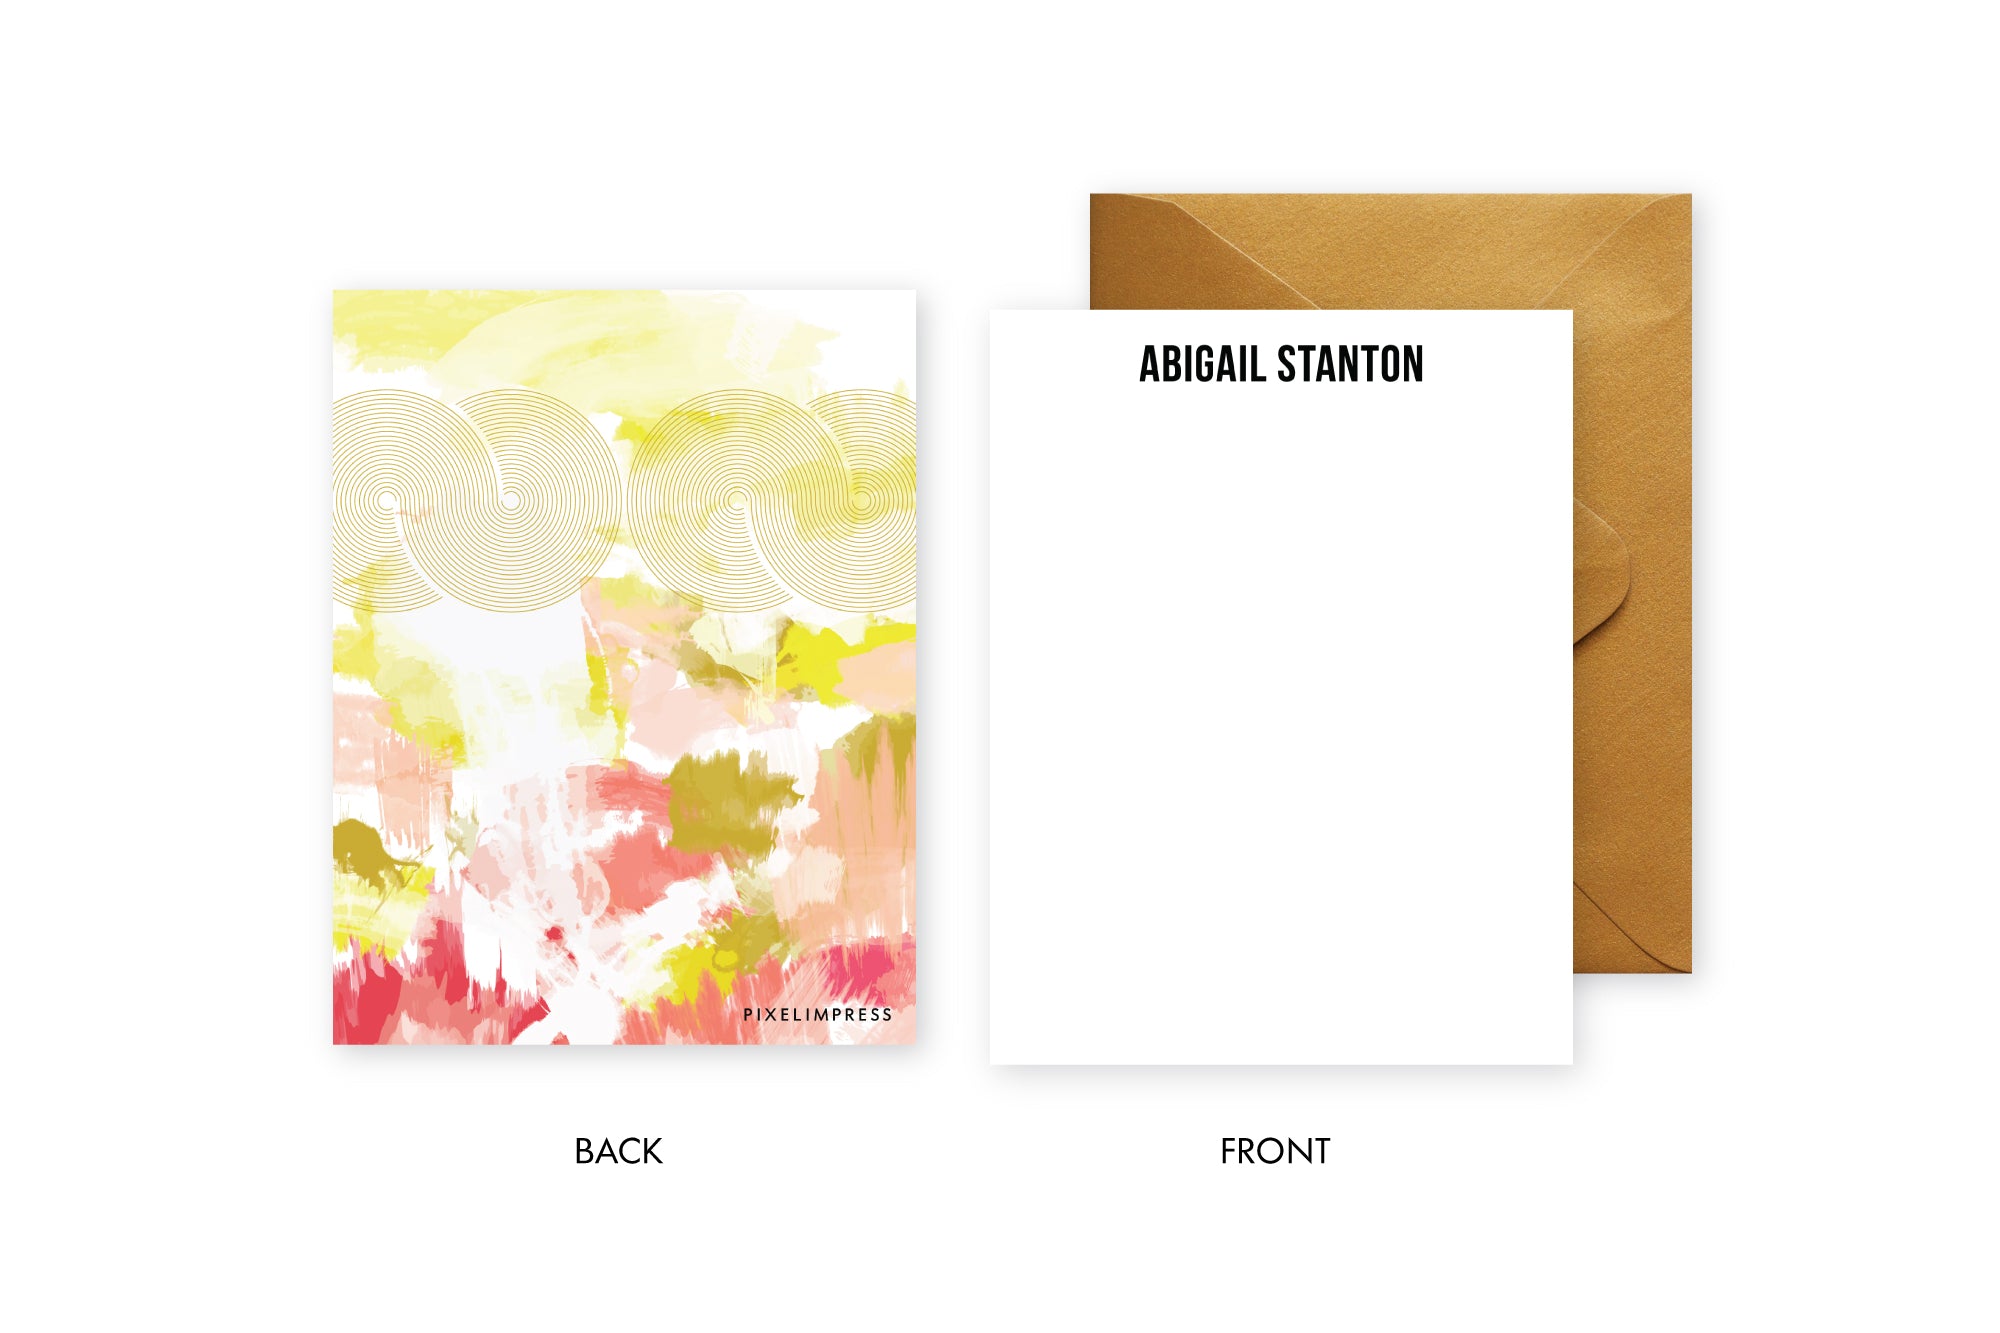 Mod Lines Yellow|Coral Abstract Stationery